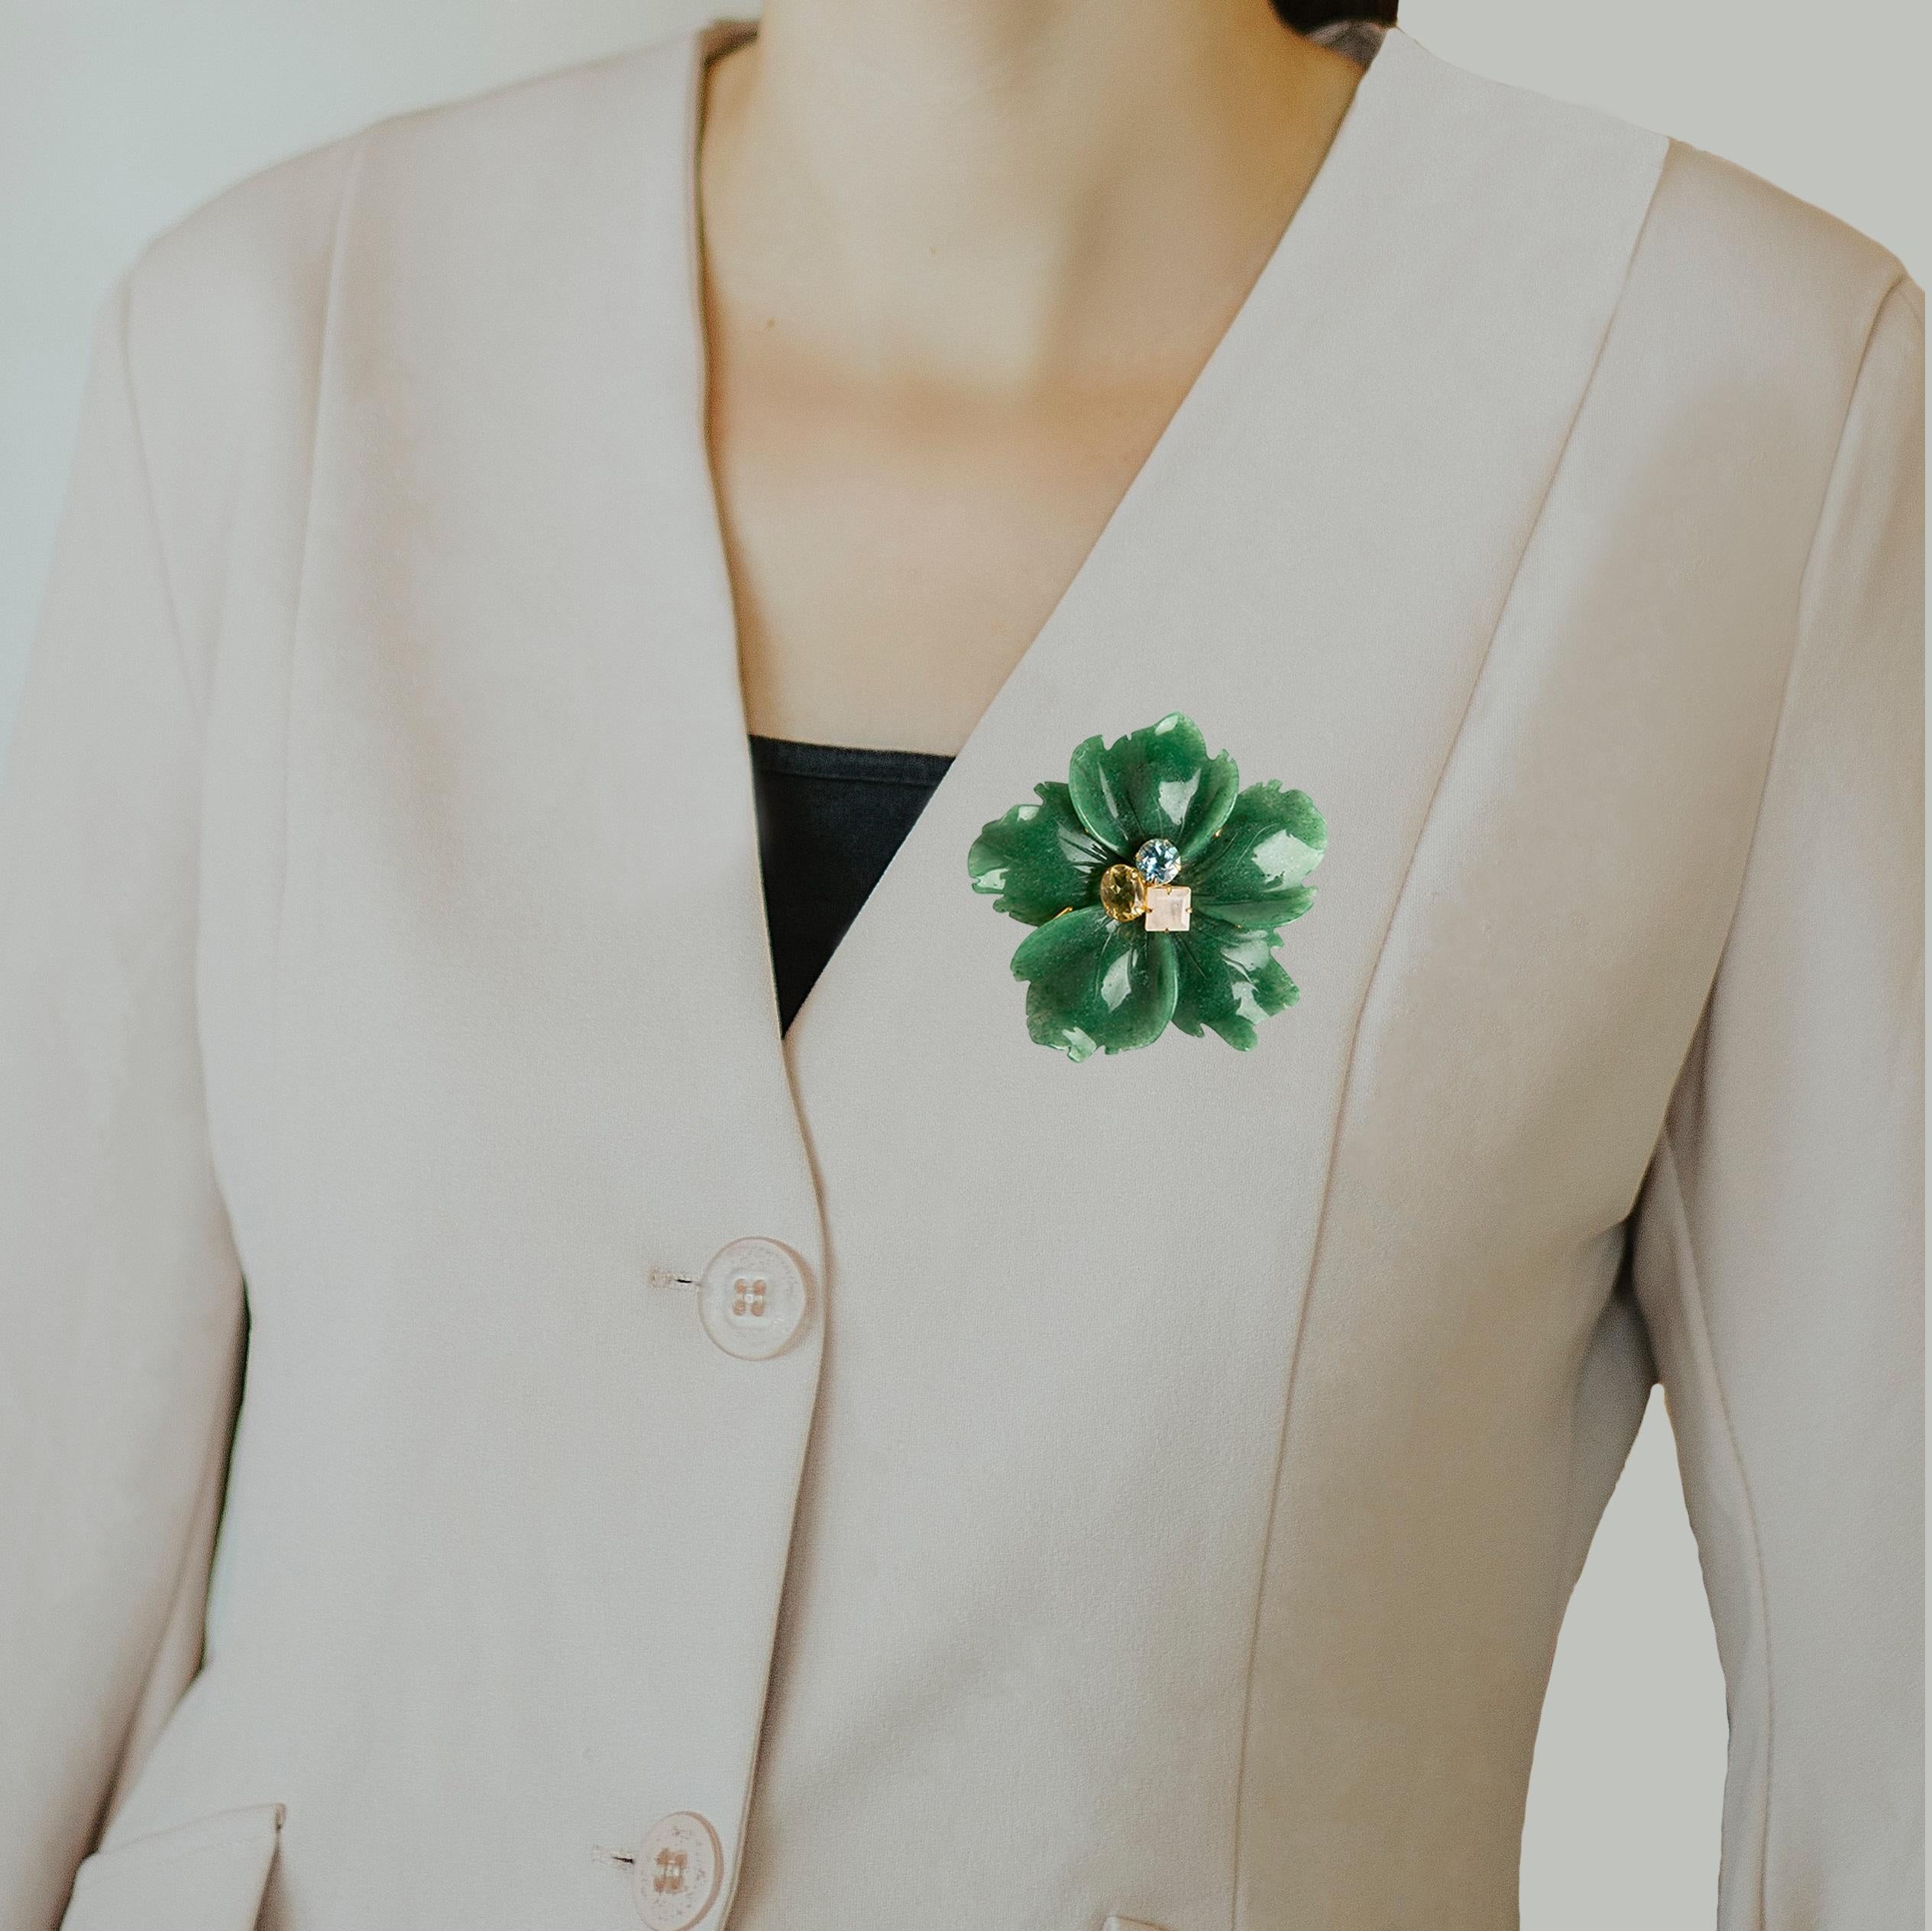 Lulu Pendant/Brooch crafted from semi-precious stones features a stunning flower design in soft colors, perfect for complementing any outfit throughout the seasons. Its retro and vintage-inspired design allows for versatile styling — wear it as a